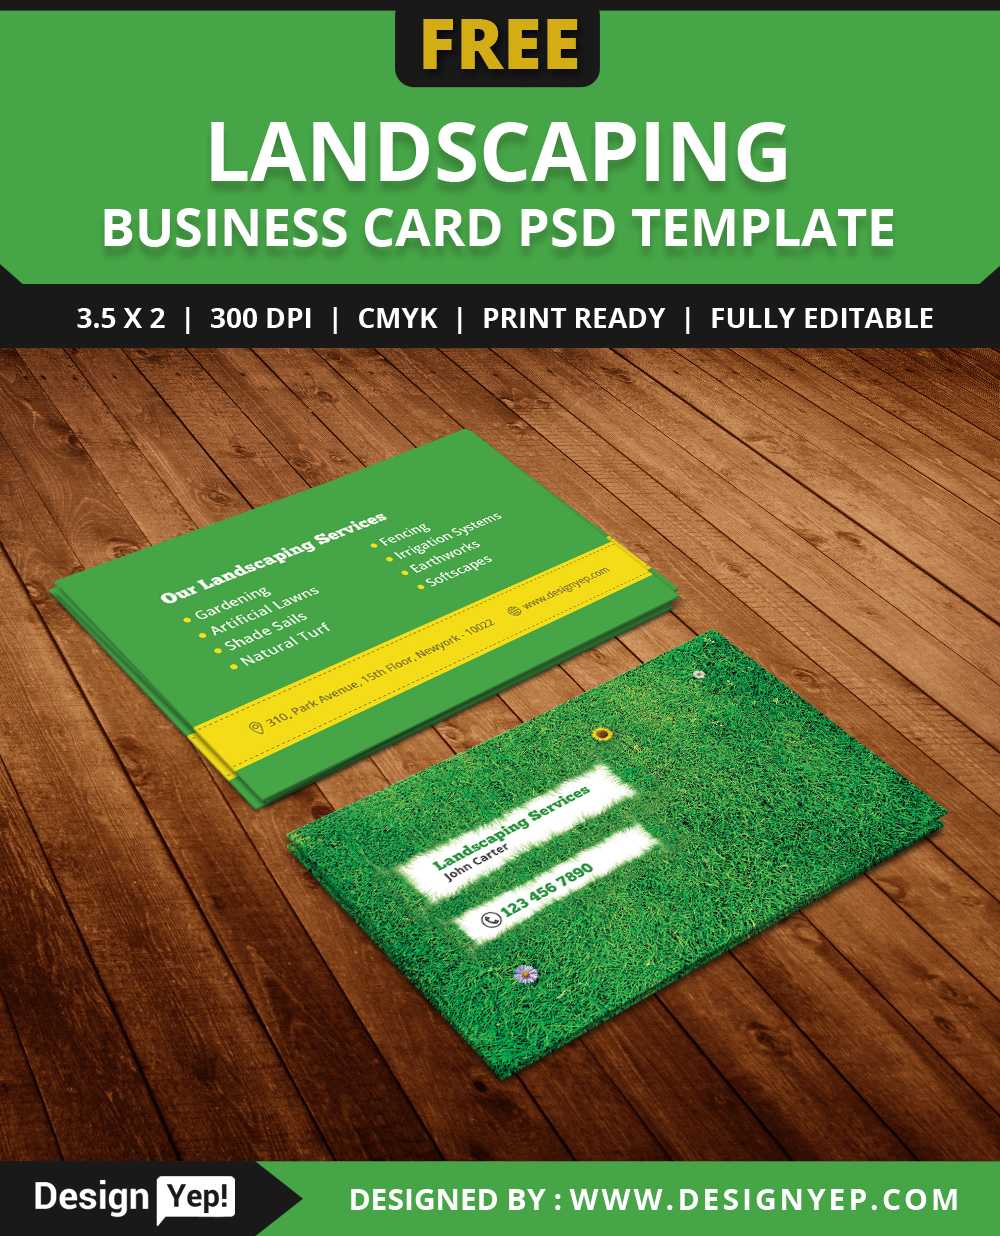 Free Landscaping Business Card Template Psd - Designyep Throughout Gardening Business Cards Templates